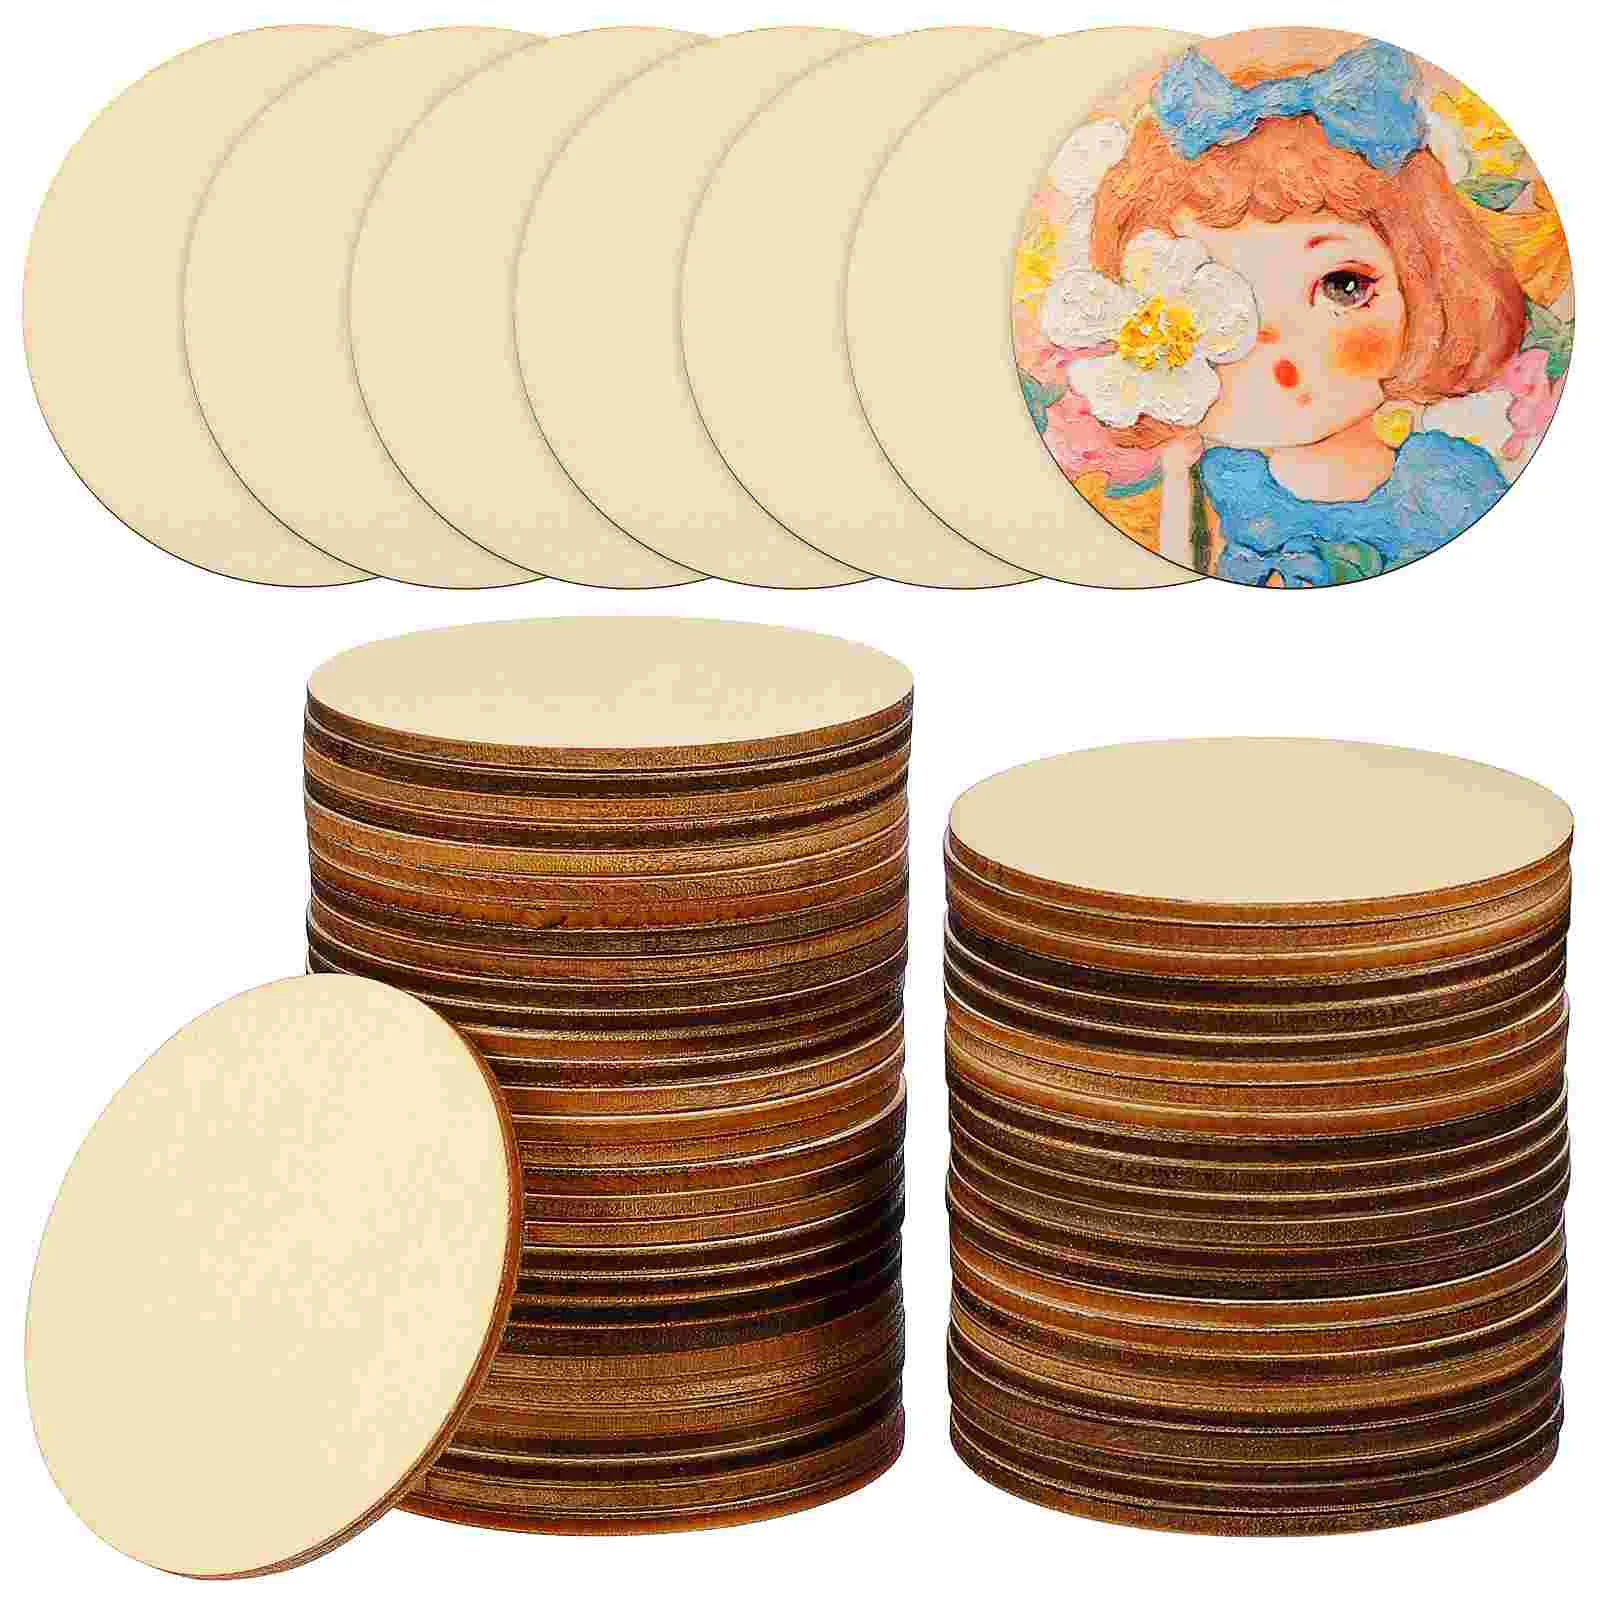 

50 Pcs Log Color Round Wood Chips DIY Crafts Unfinished Wood Craft Wafer Wooden Discs Bamboo Wood Pieces For Centerpieces Child